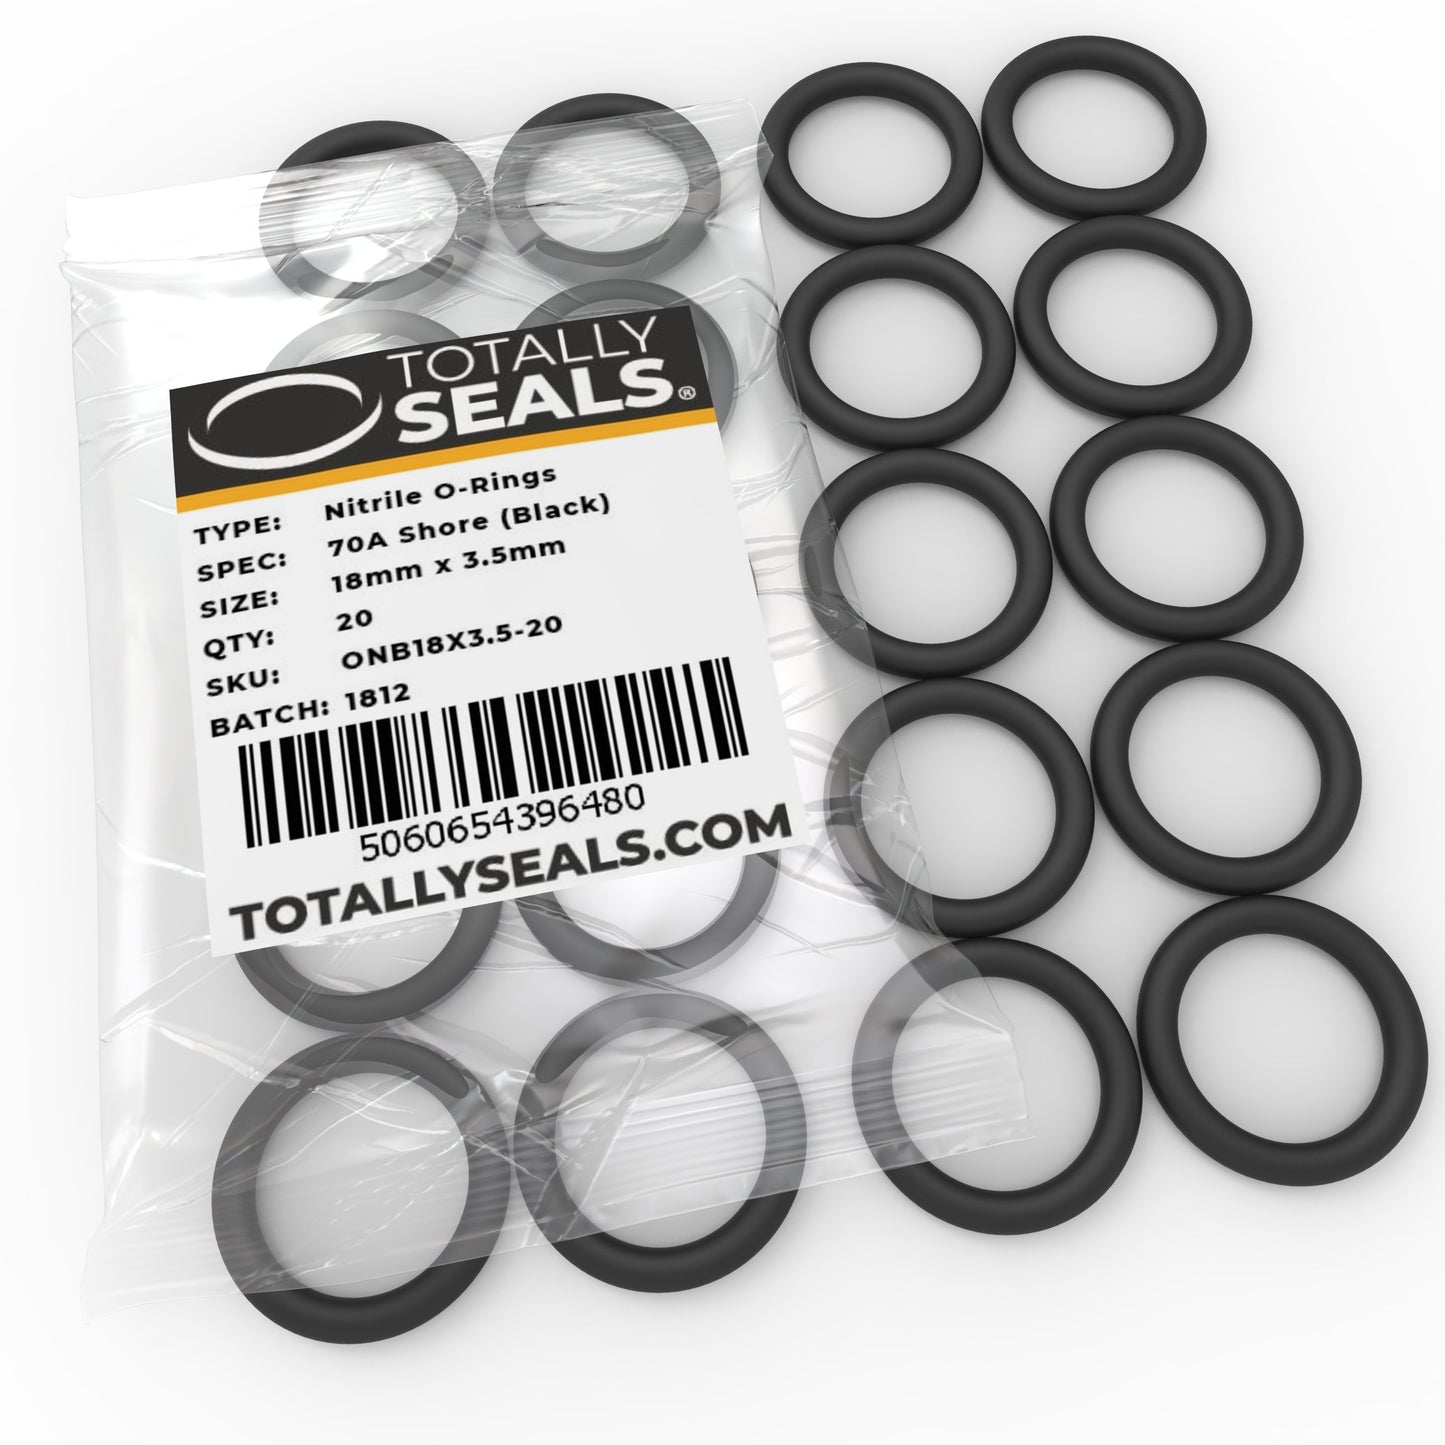 18mm x 3.5mm (25mm OD) Nitrile O-Rings - Totally Seals®